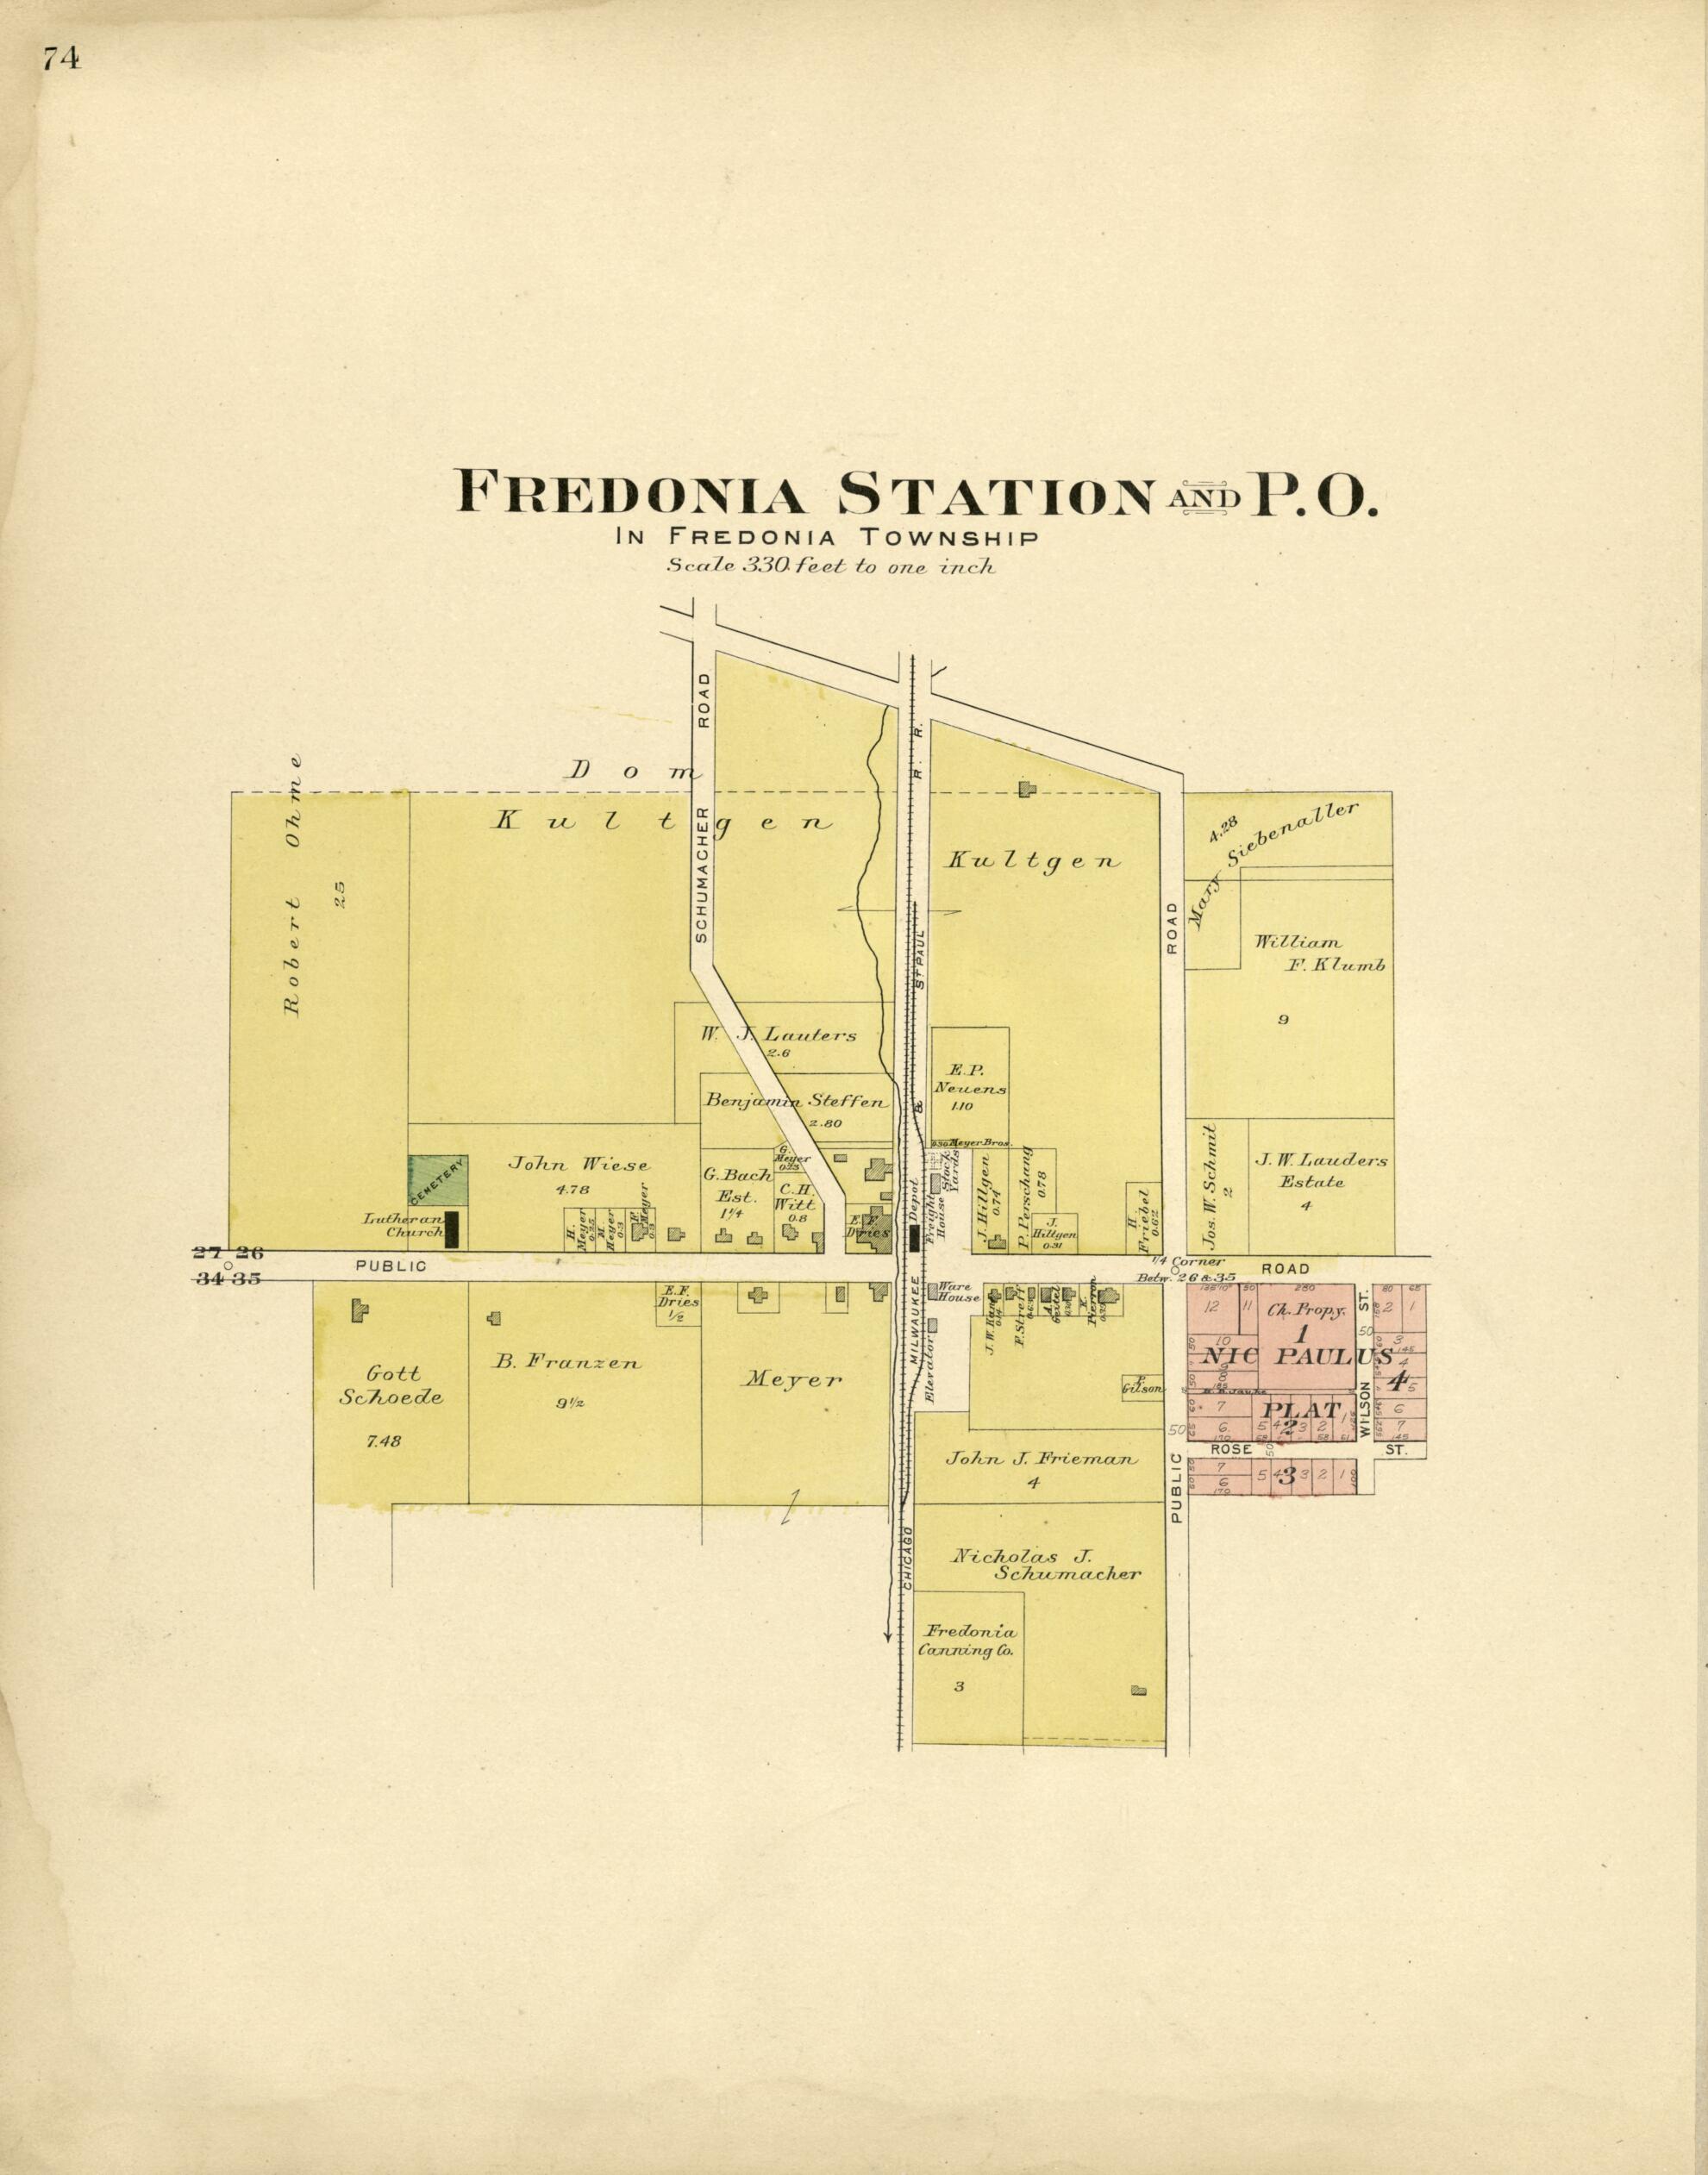 This old map of Fredonia Station and P.O from Plat Book of Washington and Ozaukee Counties, Wisconsin from 1915 was created by Albert Volk in 1915